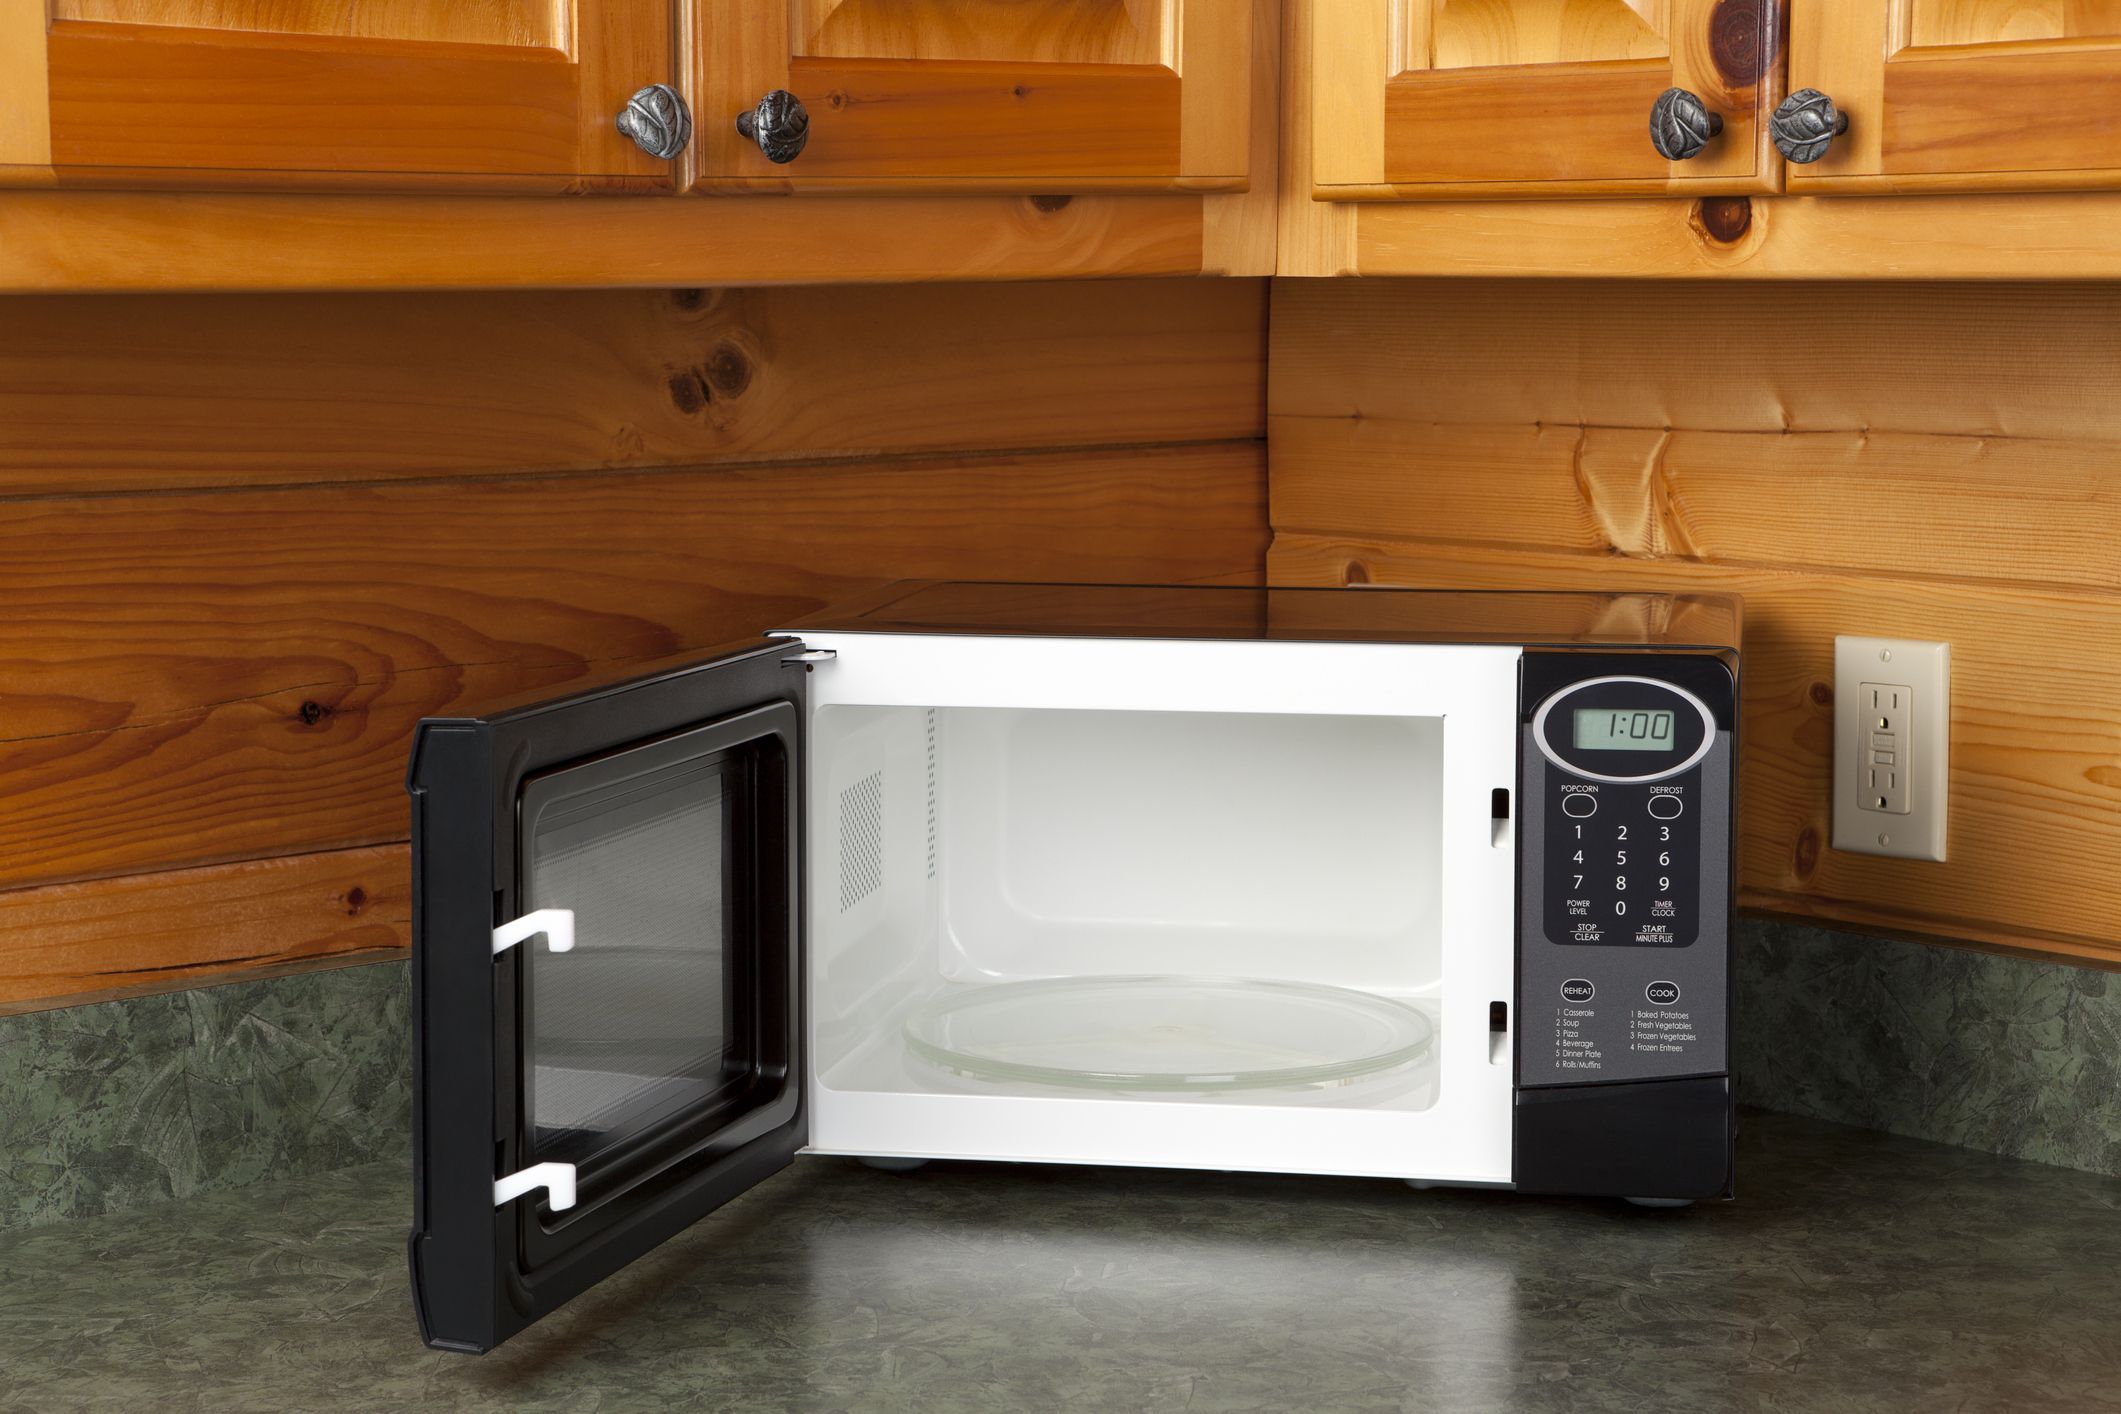 How to Clean a Microwave in 5 Easy Steps